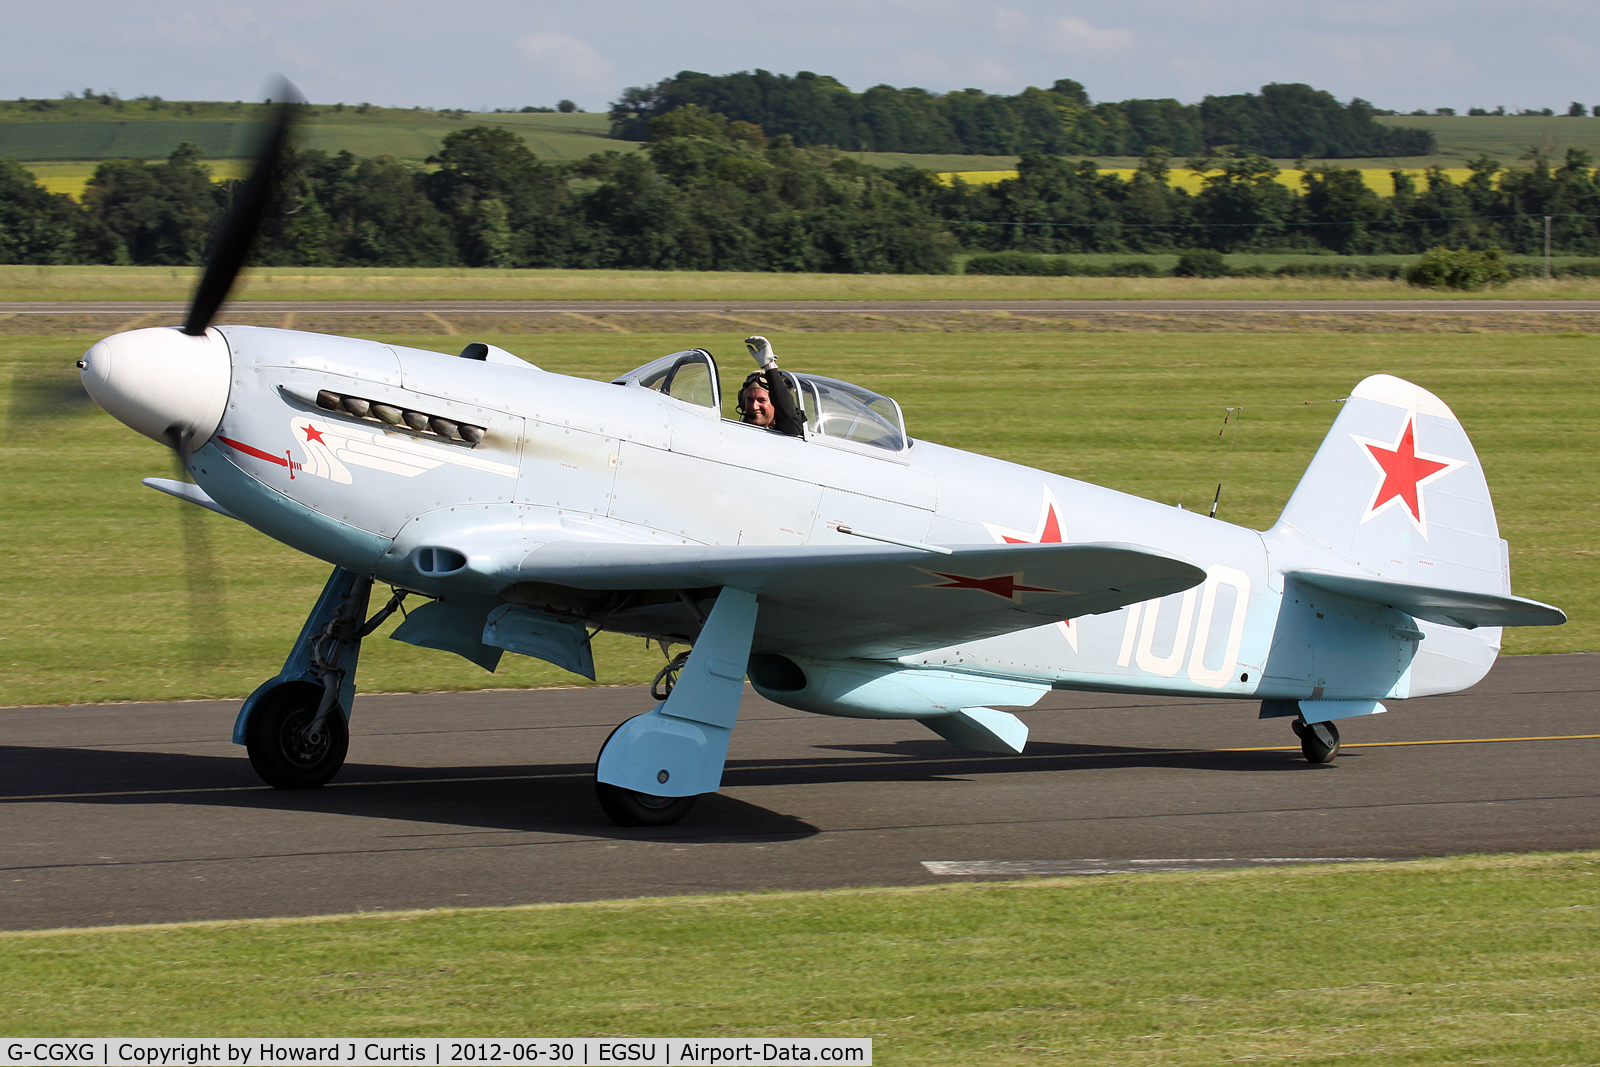 G-CGXG, 1994 Yakovlev Yak-3UA C/N 0470107, At Flying Legends 2012. Taxiing back after the last display.